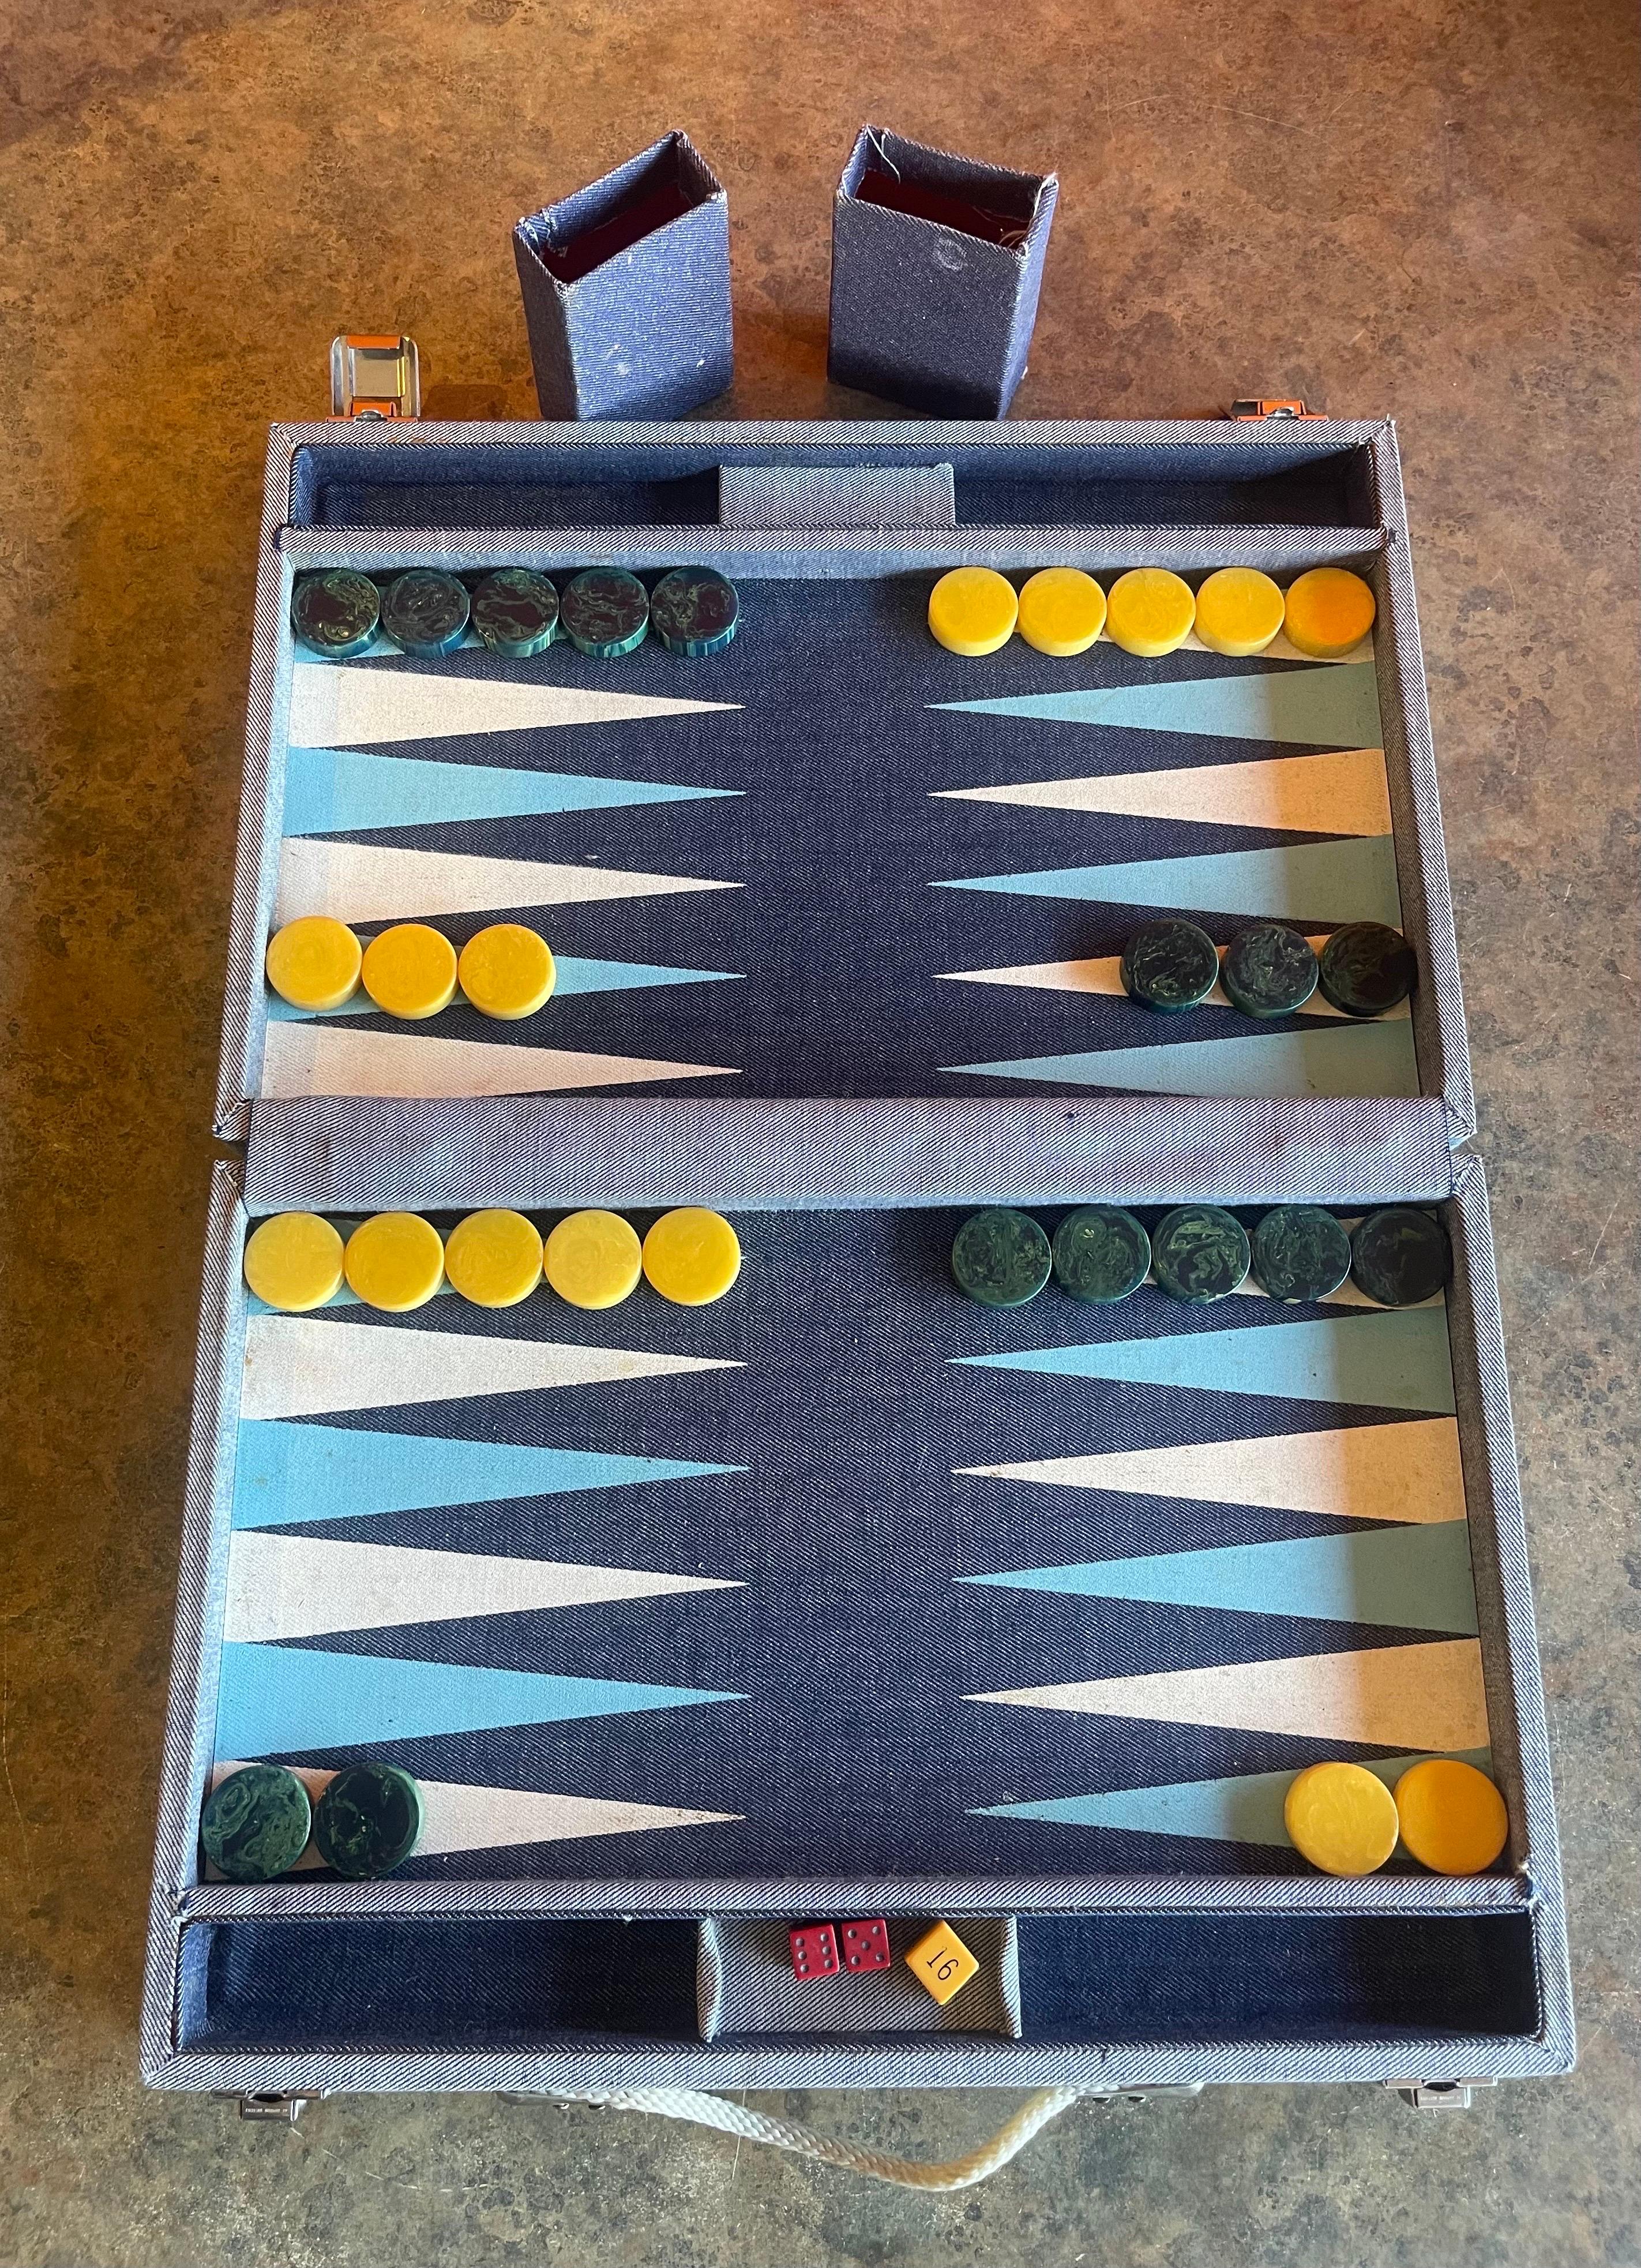 Vintage denim & bakelite backgammon set, circa 1950s. Set is complete with a foldable case / board with denim fabric, 30 bakelite checkers (bright yellow and deep blue in color), doubling cube, two dice cups and a pair of vintage dice. Overall, the